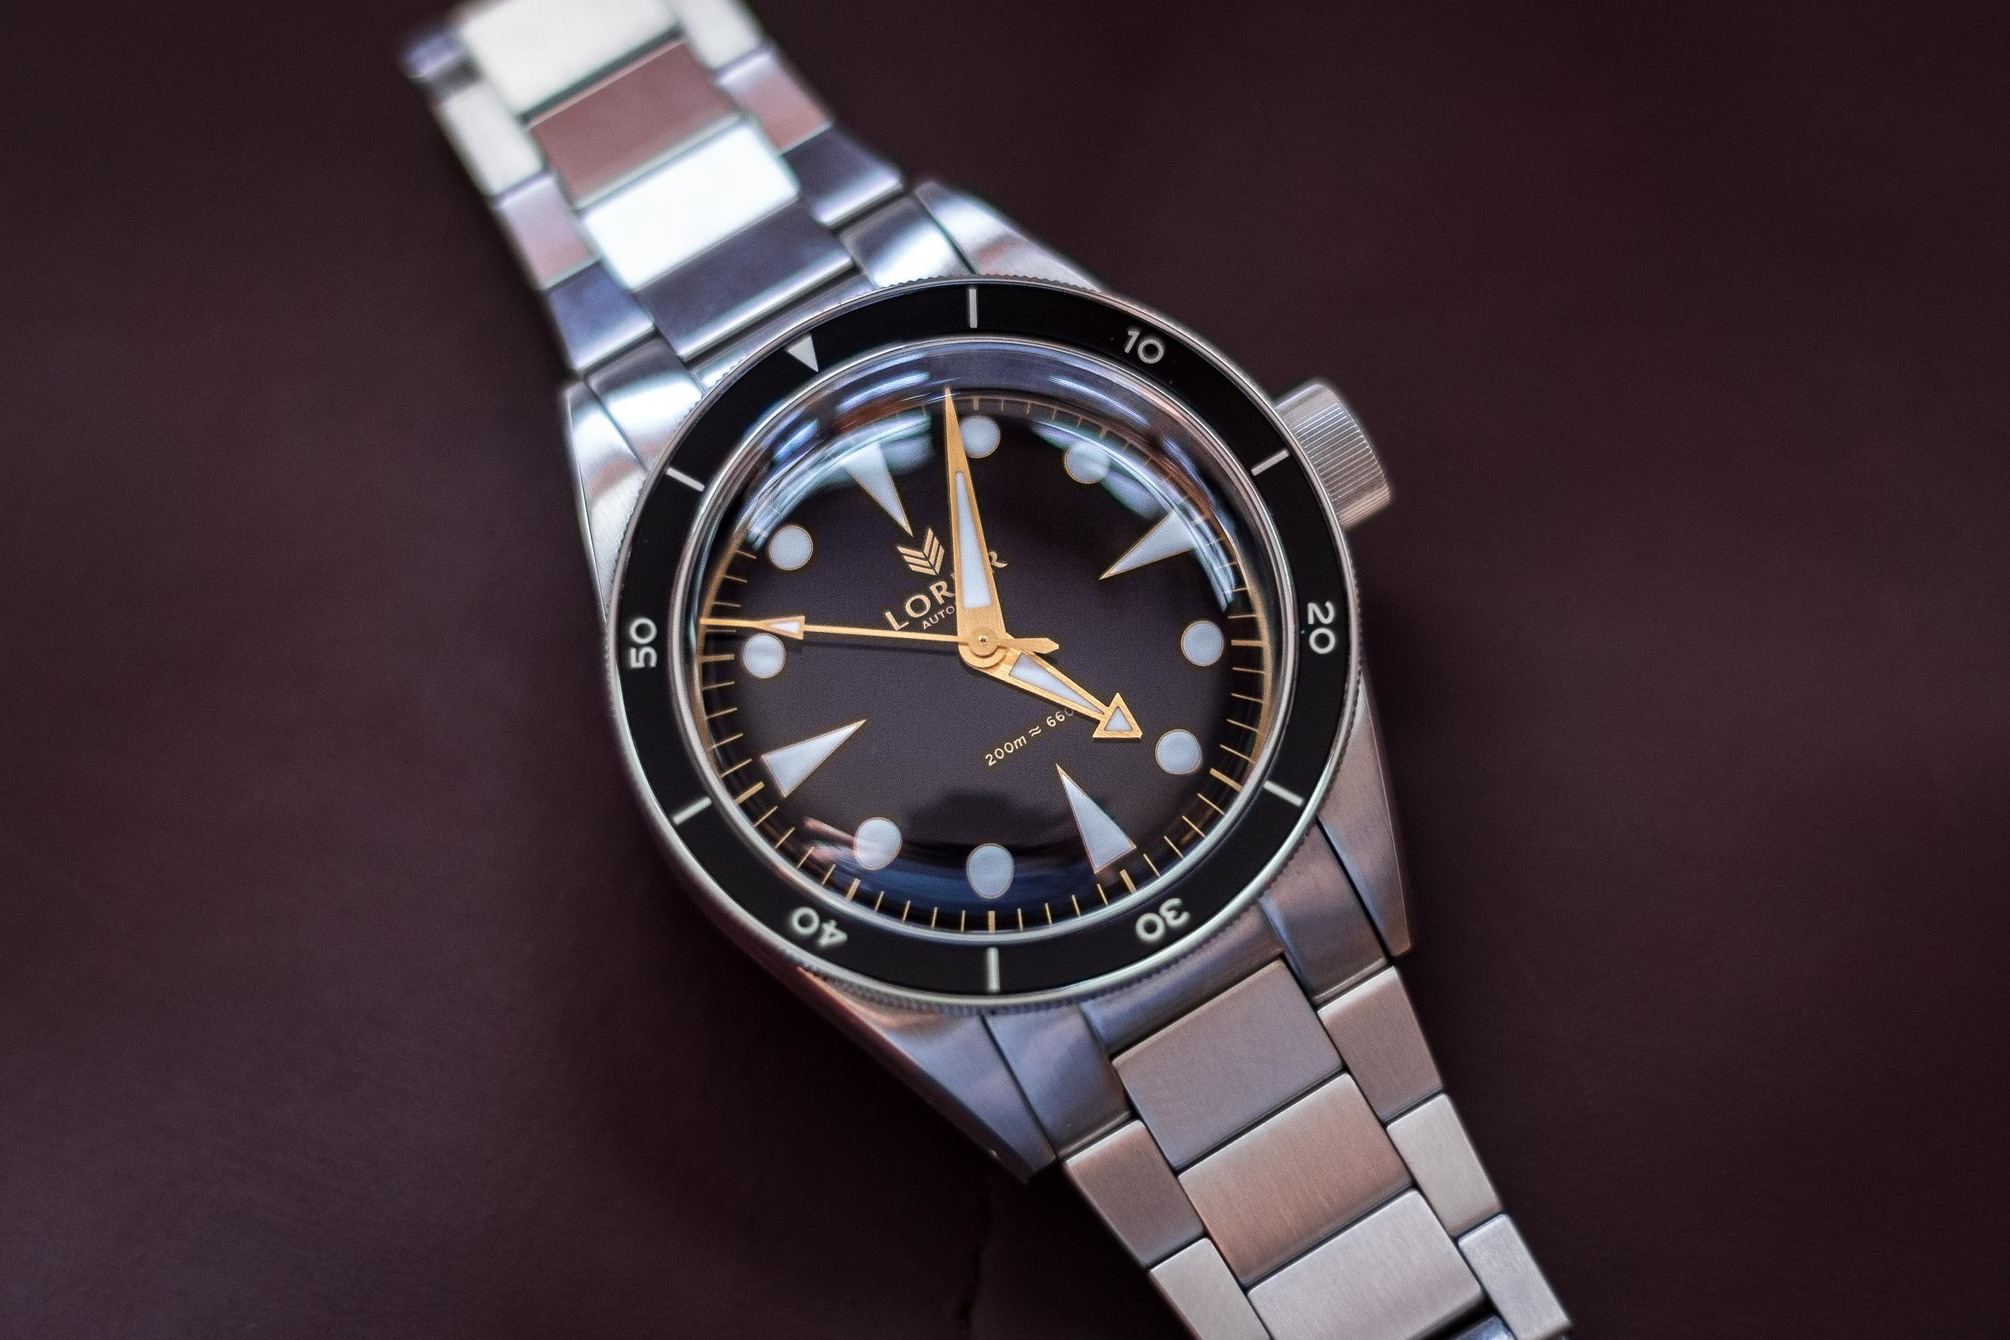 Lorier] What Microbrand is Currently Producing The Best Watches? : r/Watches